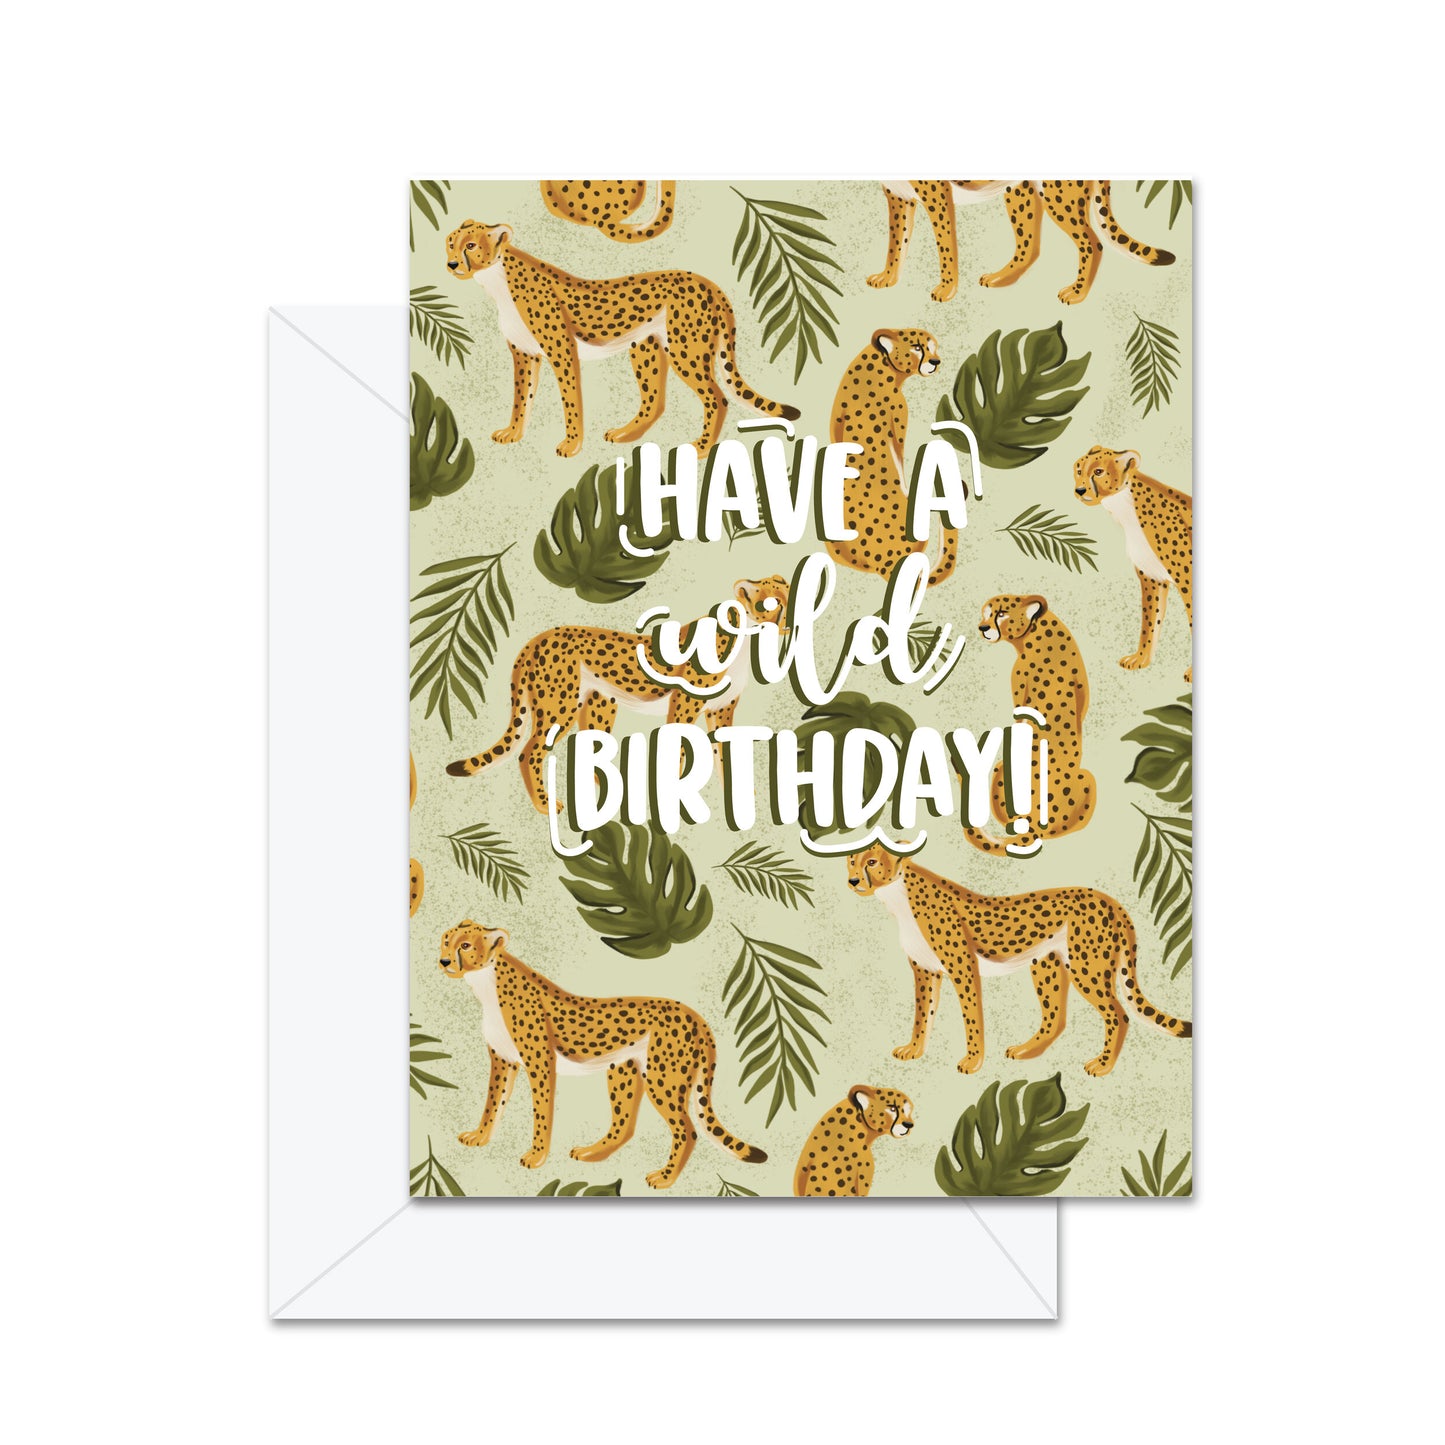 Have A Wild Birthday! - Greeting Card